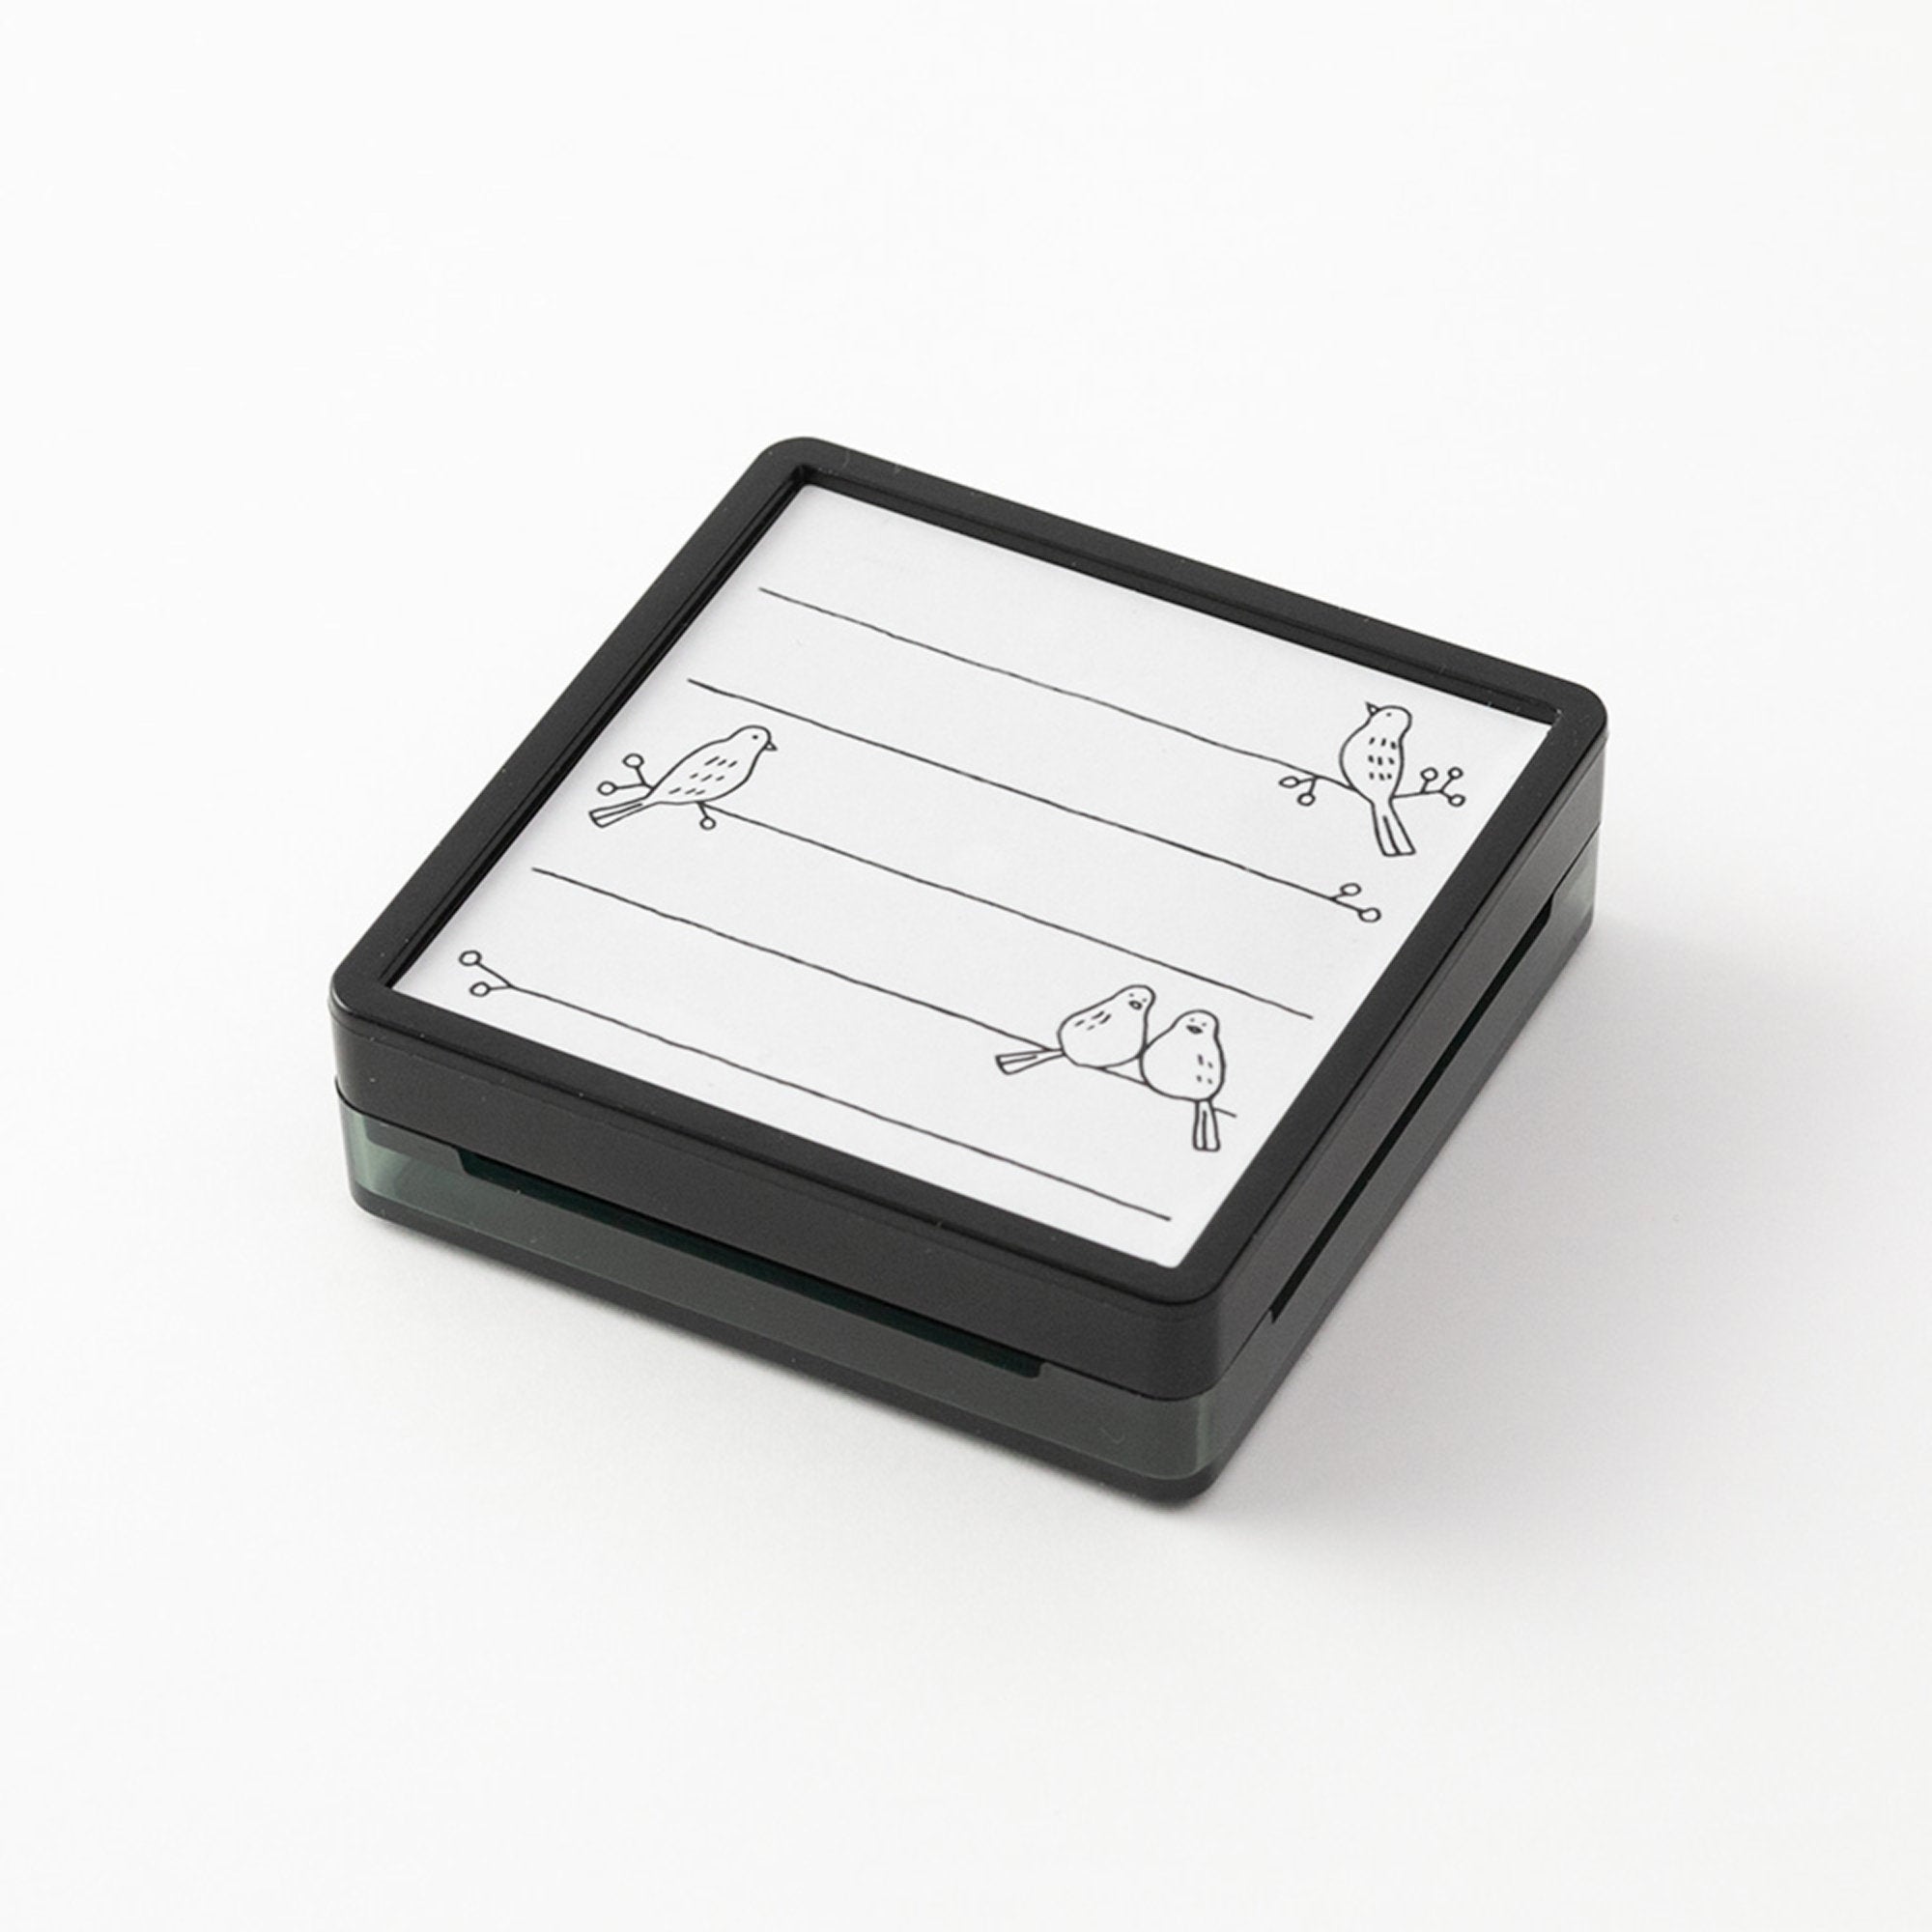 Midori Square Paintable Stamp Re-Inkable Self-Inking Stamp | BIRD Sage Package - The Stationery Life!